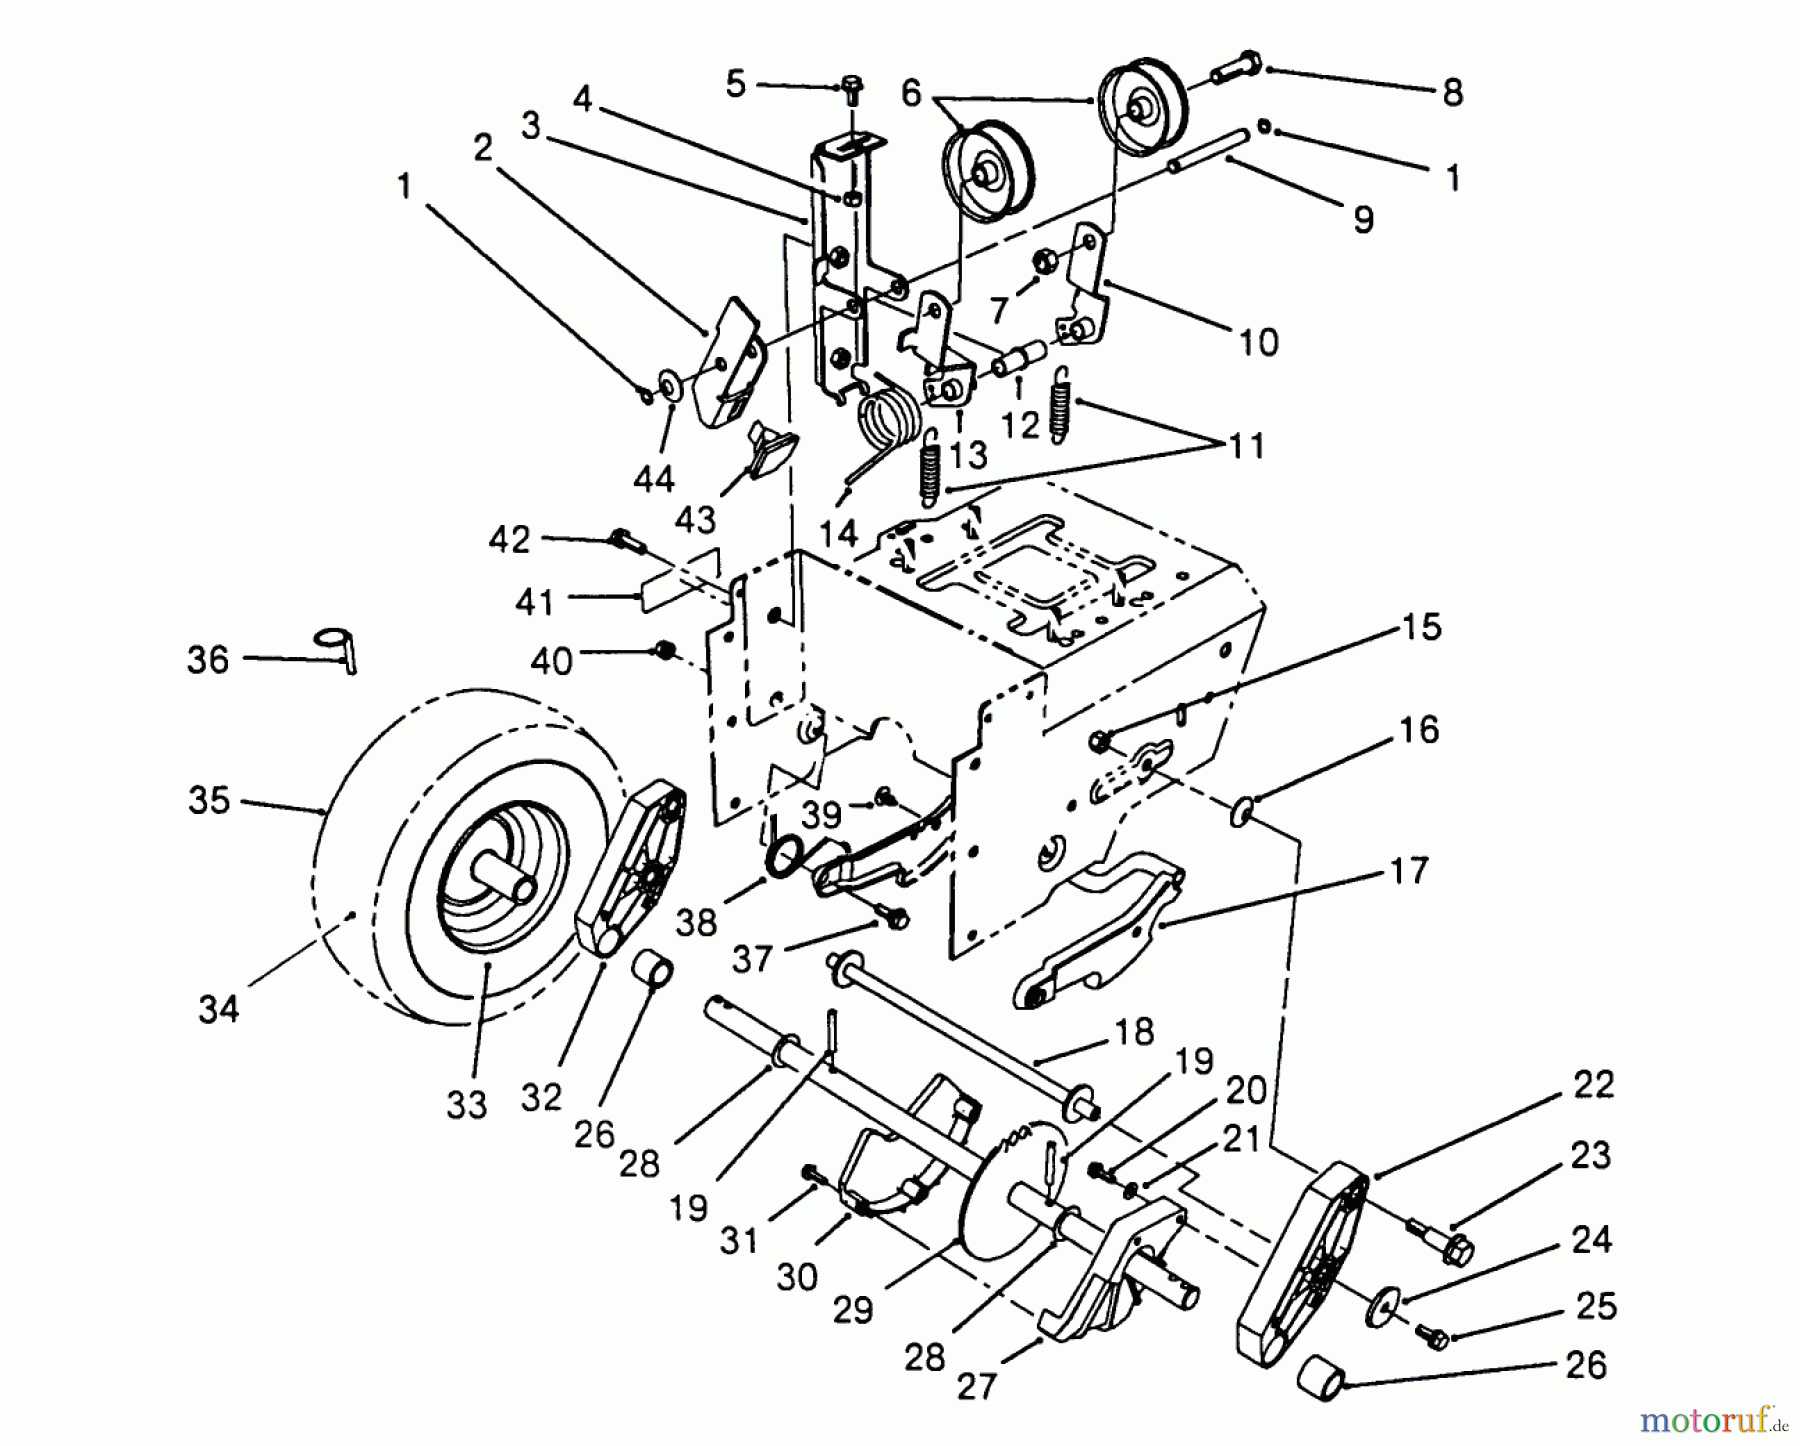  Toro Neu Snow Blowers/Snow Throwers Seite 1 38573 (828) - Toro 828 Power Shift Snowthrower, 1988 (8000001-8999999) TRACTION DRIVE ASSEMBLY